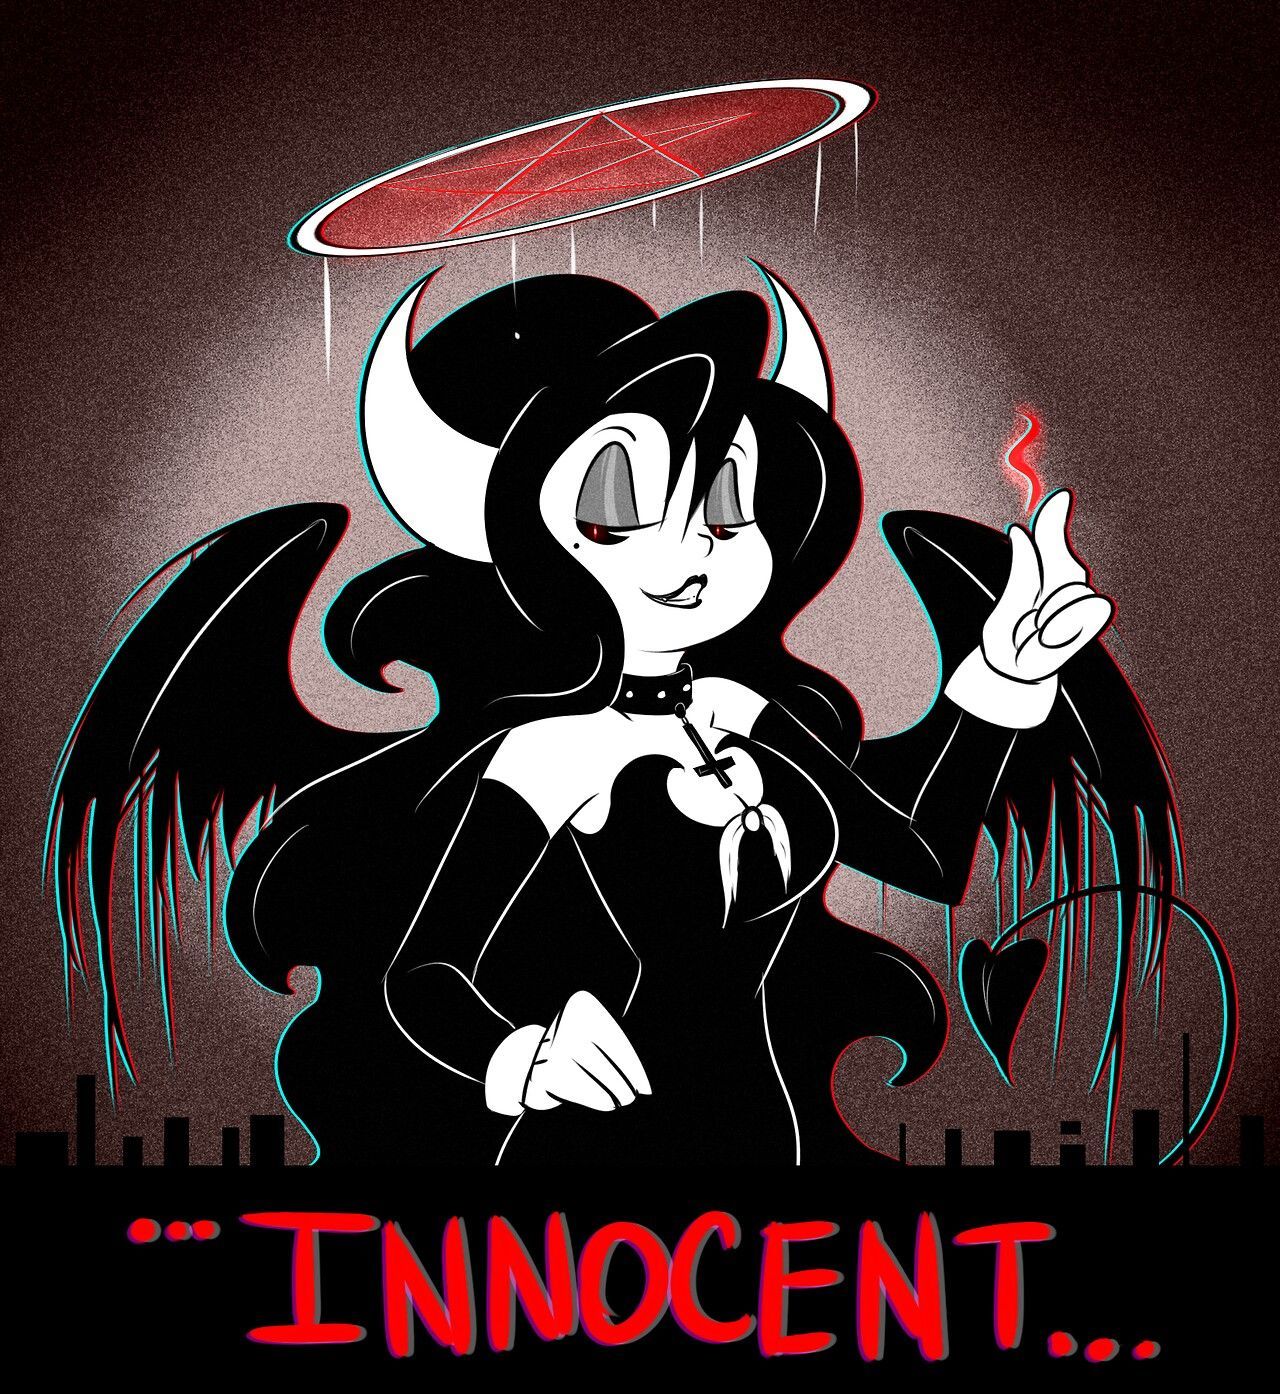 Alice demon. Bendy and the ink machine, Alice angel, Drawings